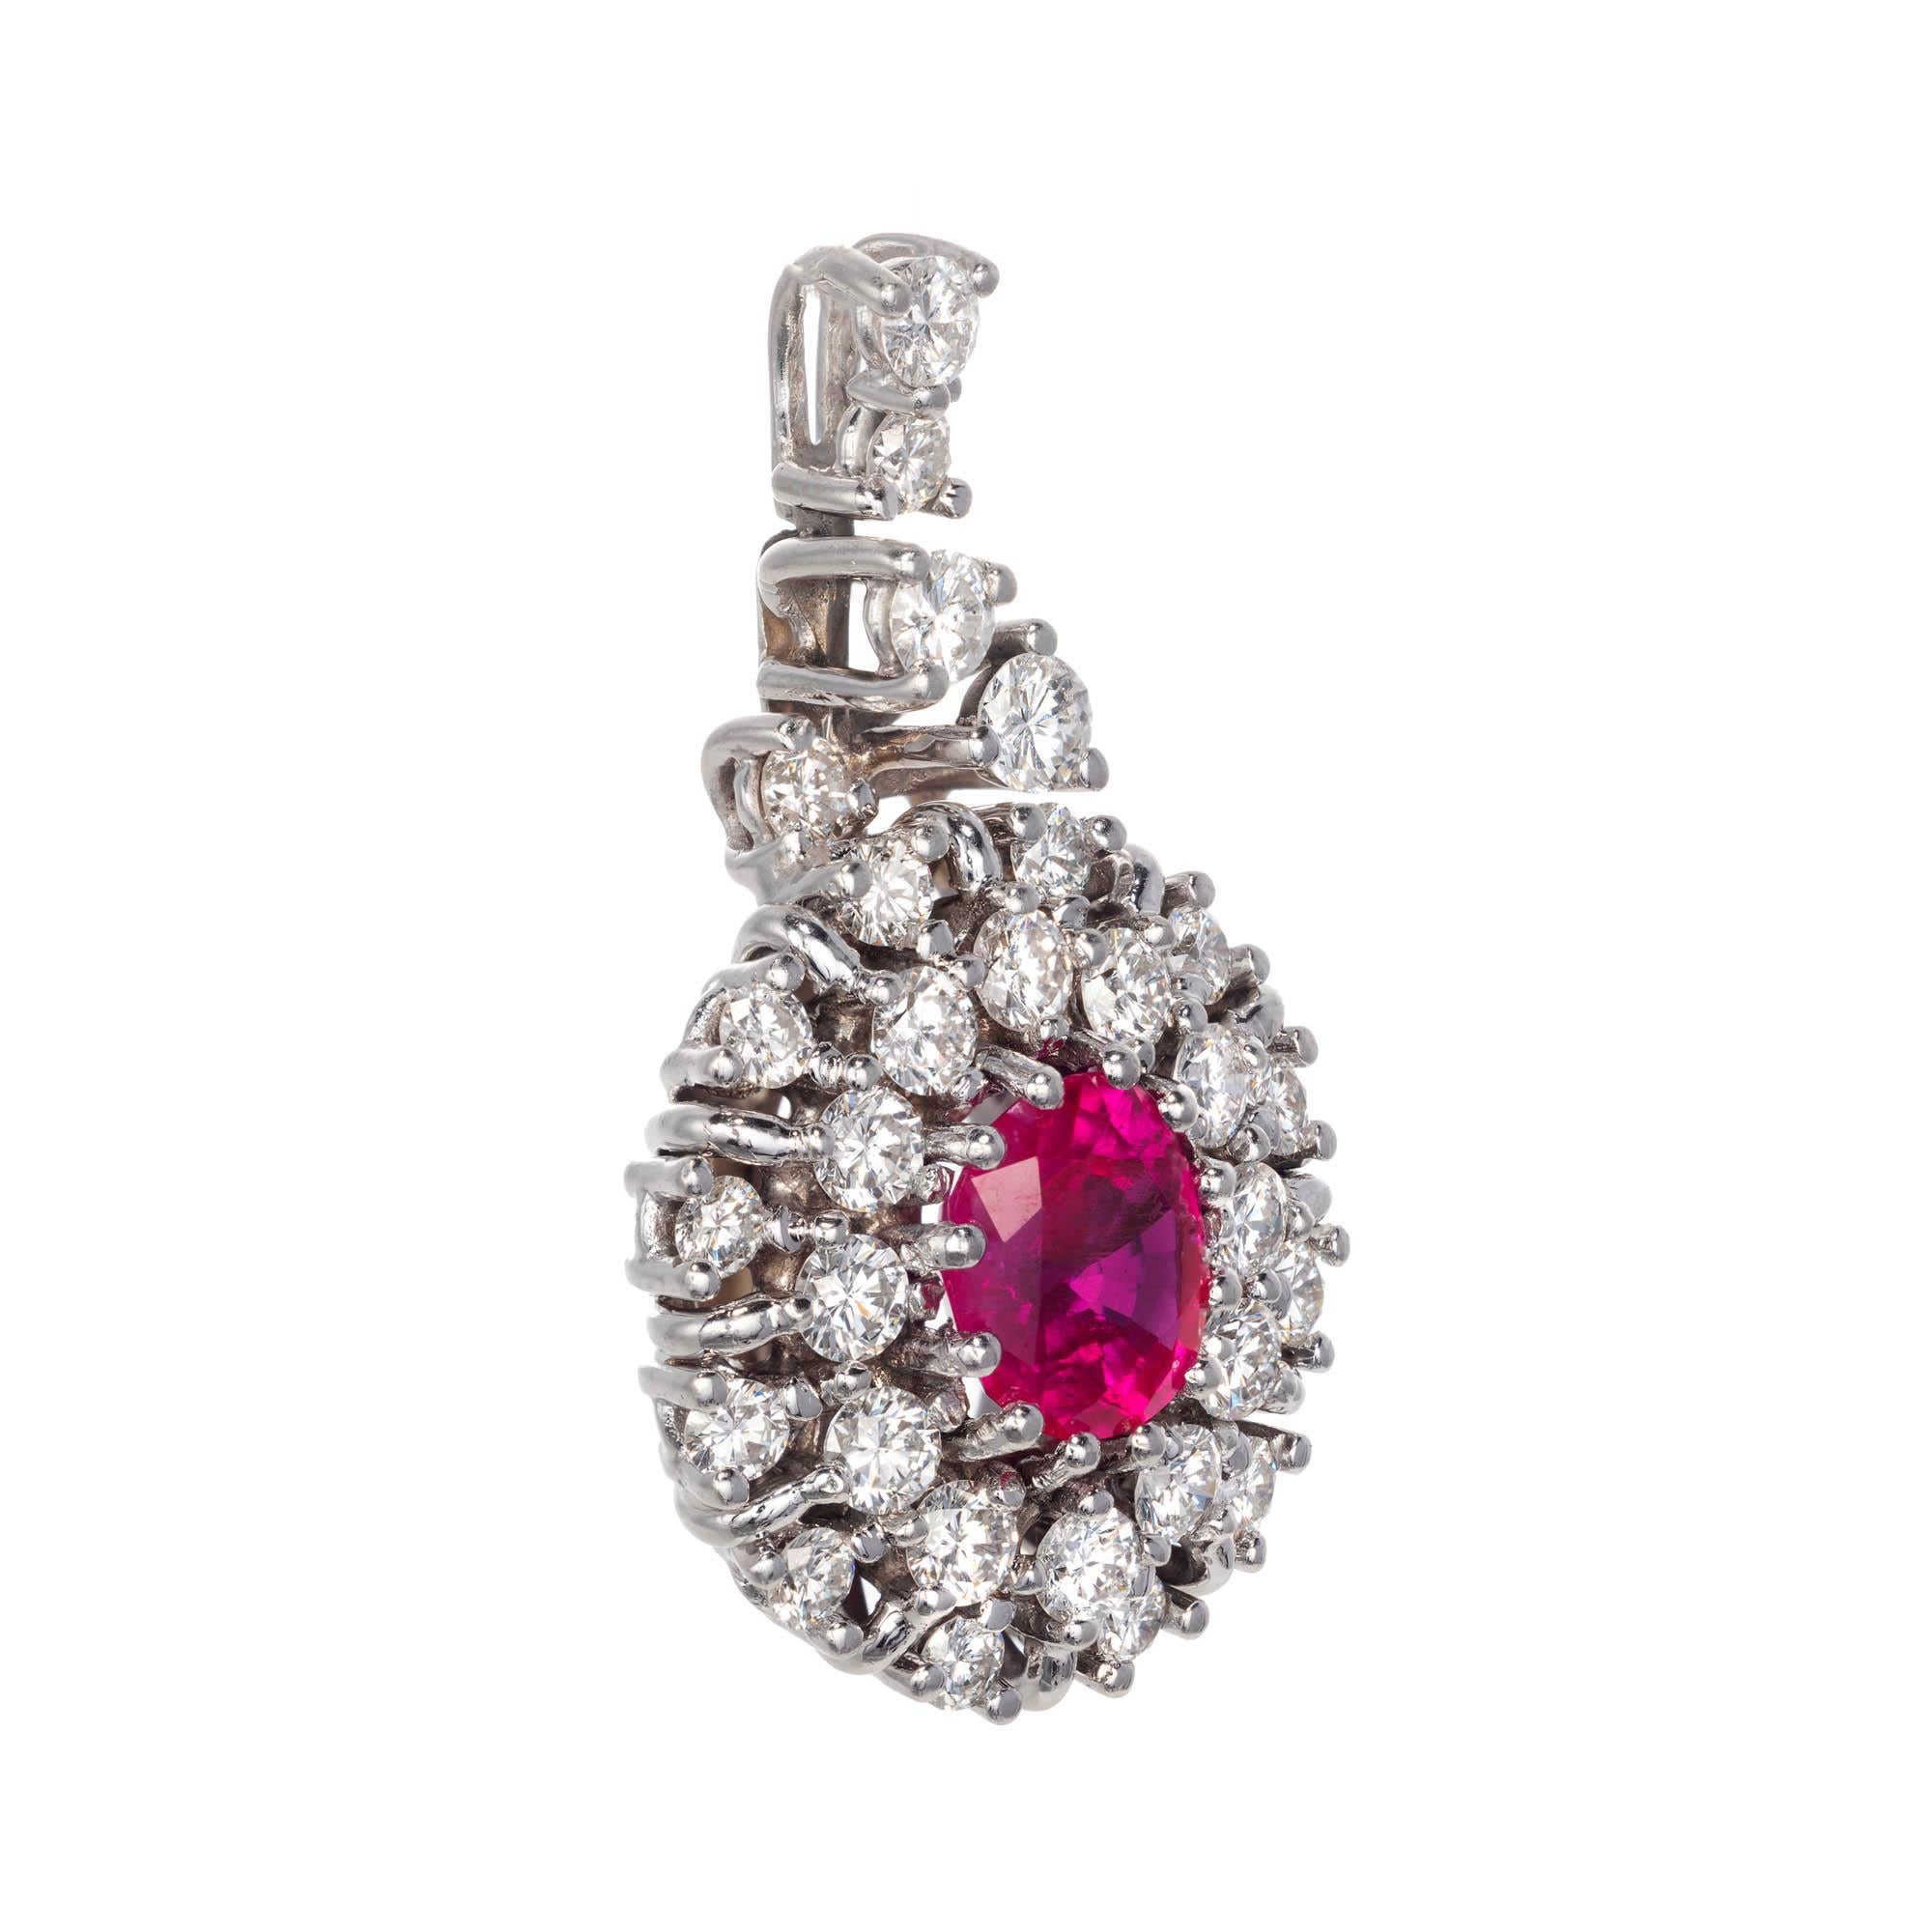 18k white gold vintage style Ruby and Diamond pendant. Oval Ruby sits center surrounded by 2 rows of round brilliant cut Diamonds with additional accent Diamonds hiding the bale.

1 oval pinkish red Ruby, approx. total weight 1.12cts, 7.28 x 6.23 x